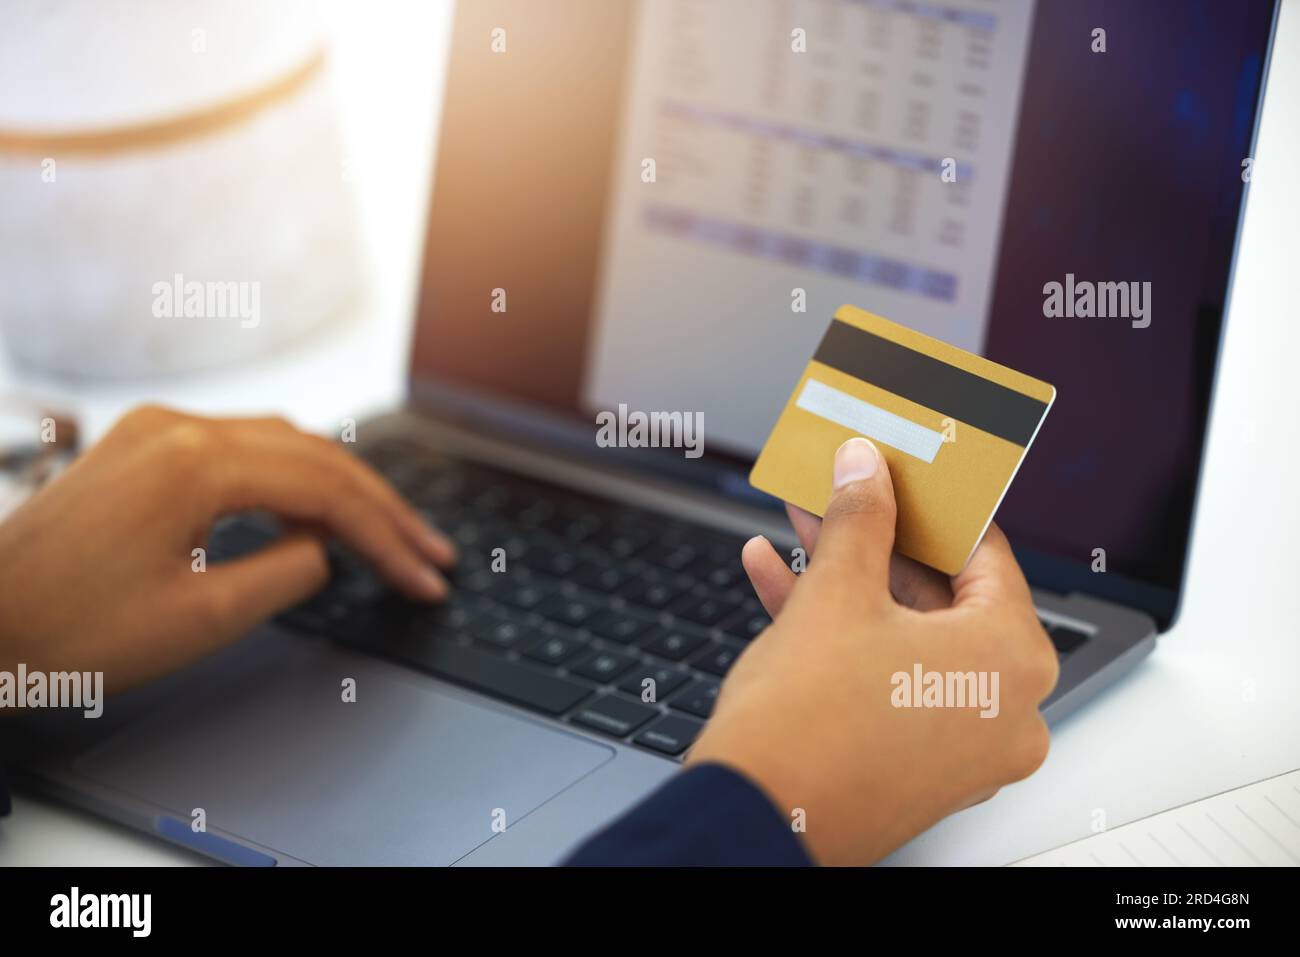 Credit card, laptop and business man hands for invoice, online payment and budget or digital receipt in accounting. Business person on computer screen Stock Photo